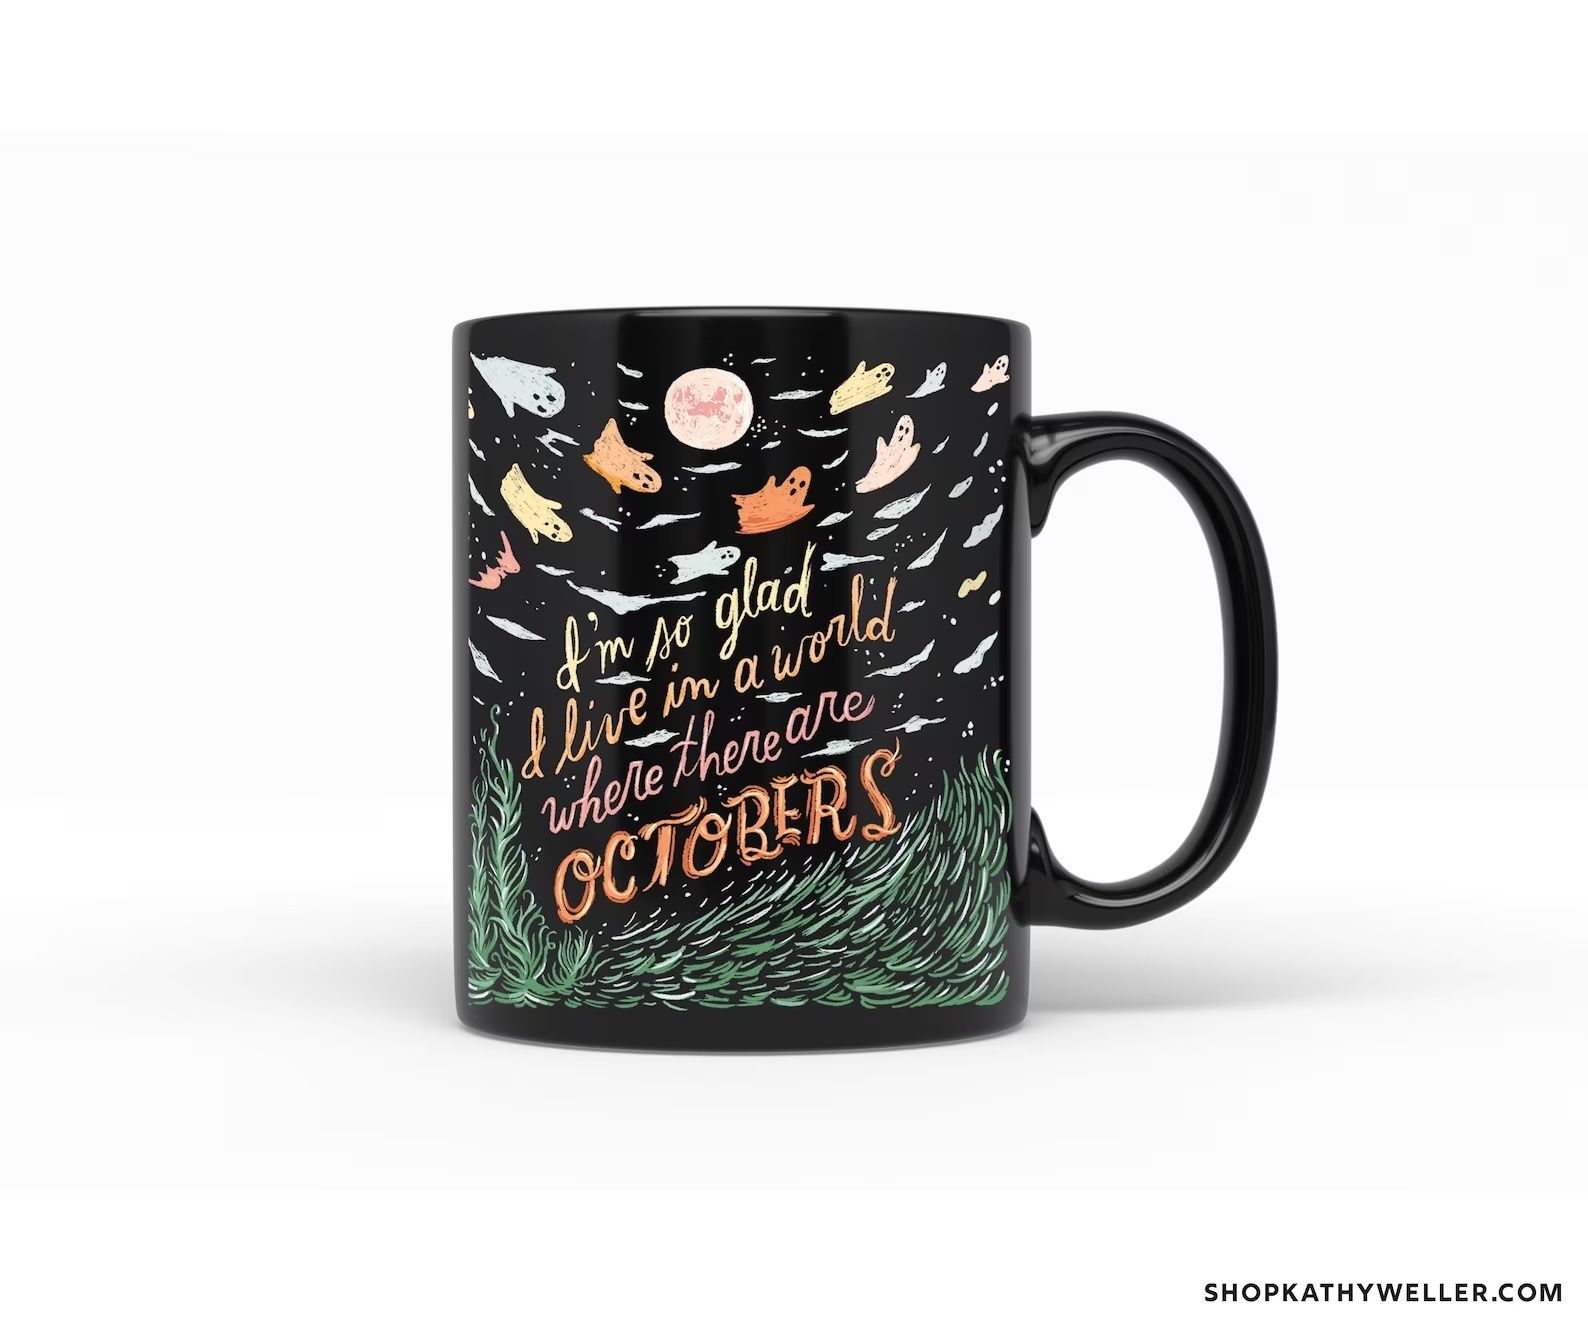 mug what says i'm so glad i livein a world where there are octobers